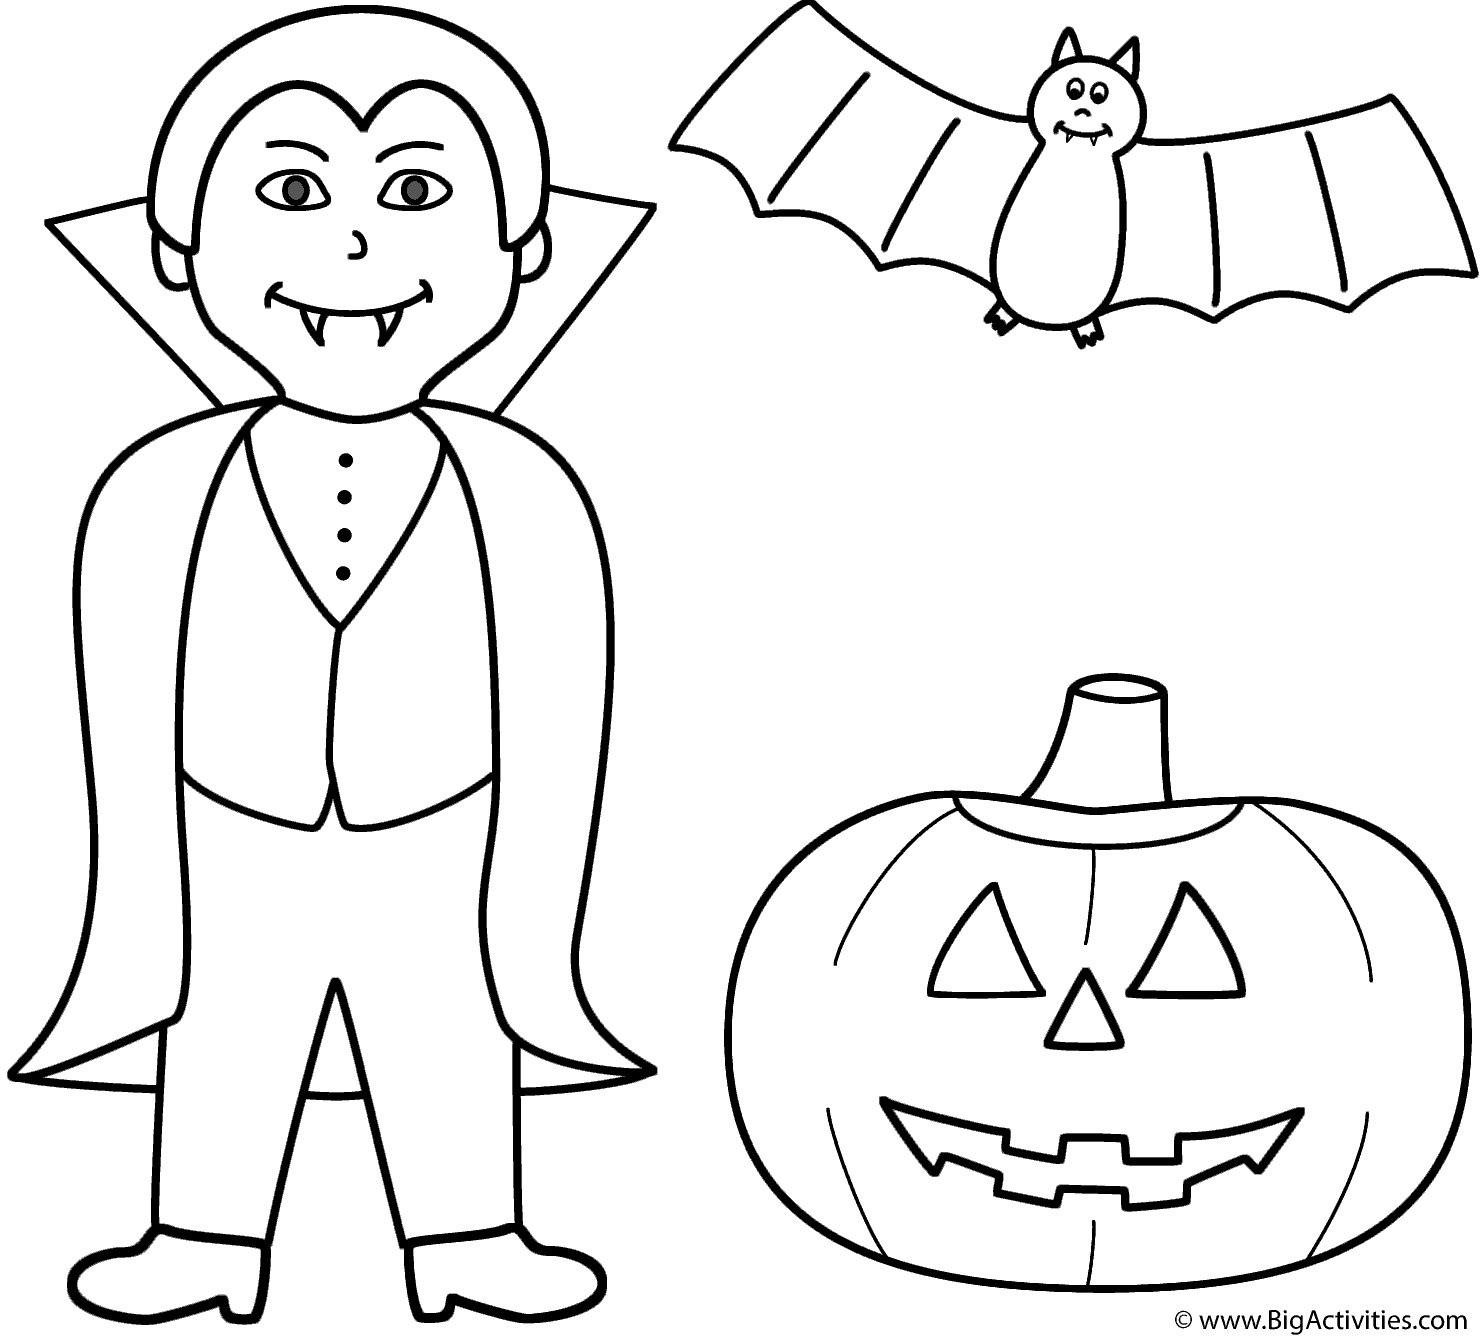 Vampire with a pumpkin/jack-o-lantern and bat - Coloring Page (Halloween)